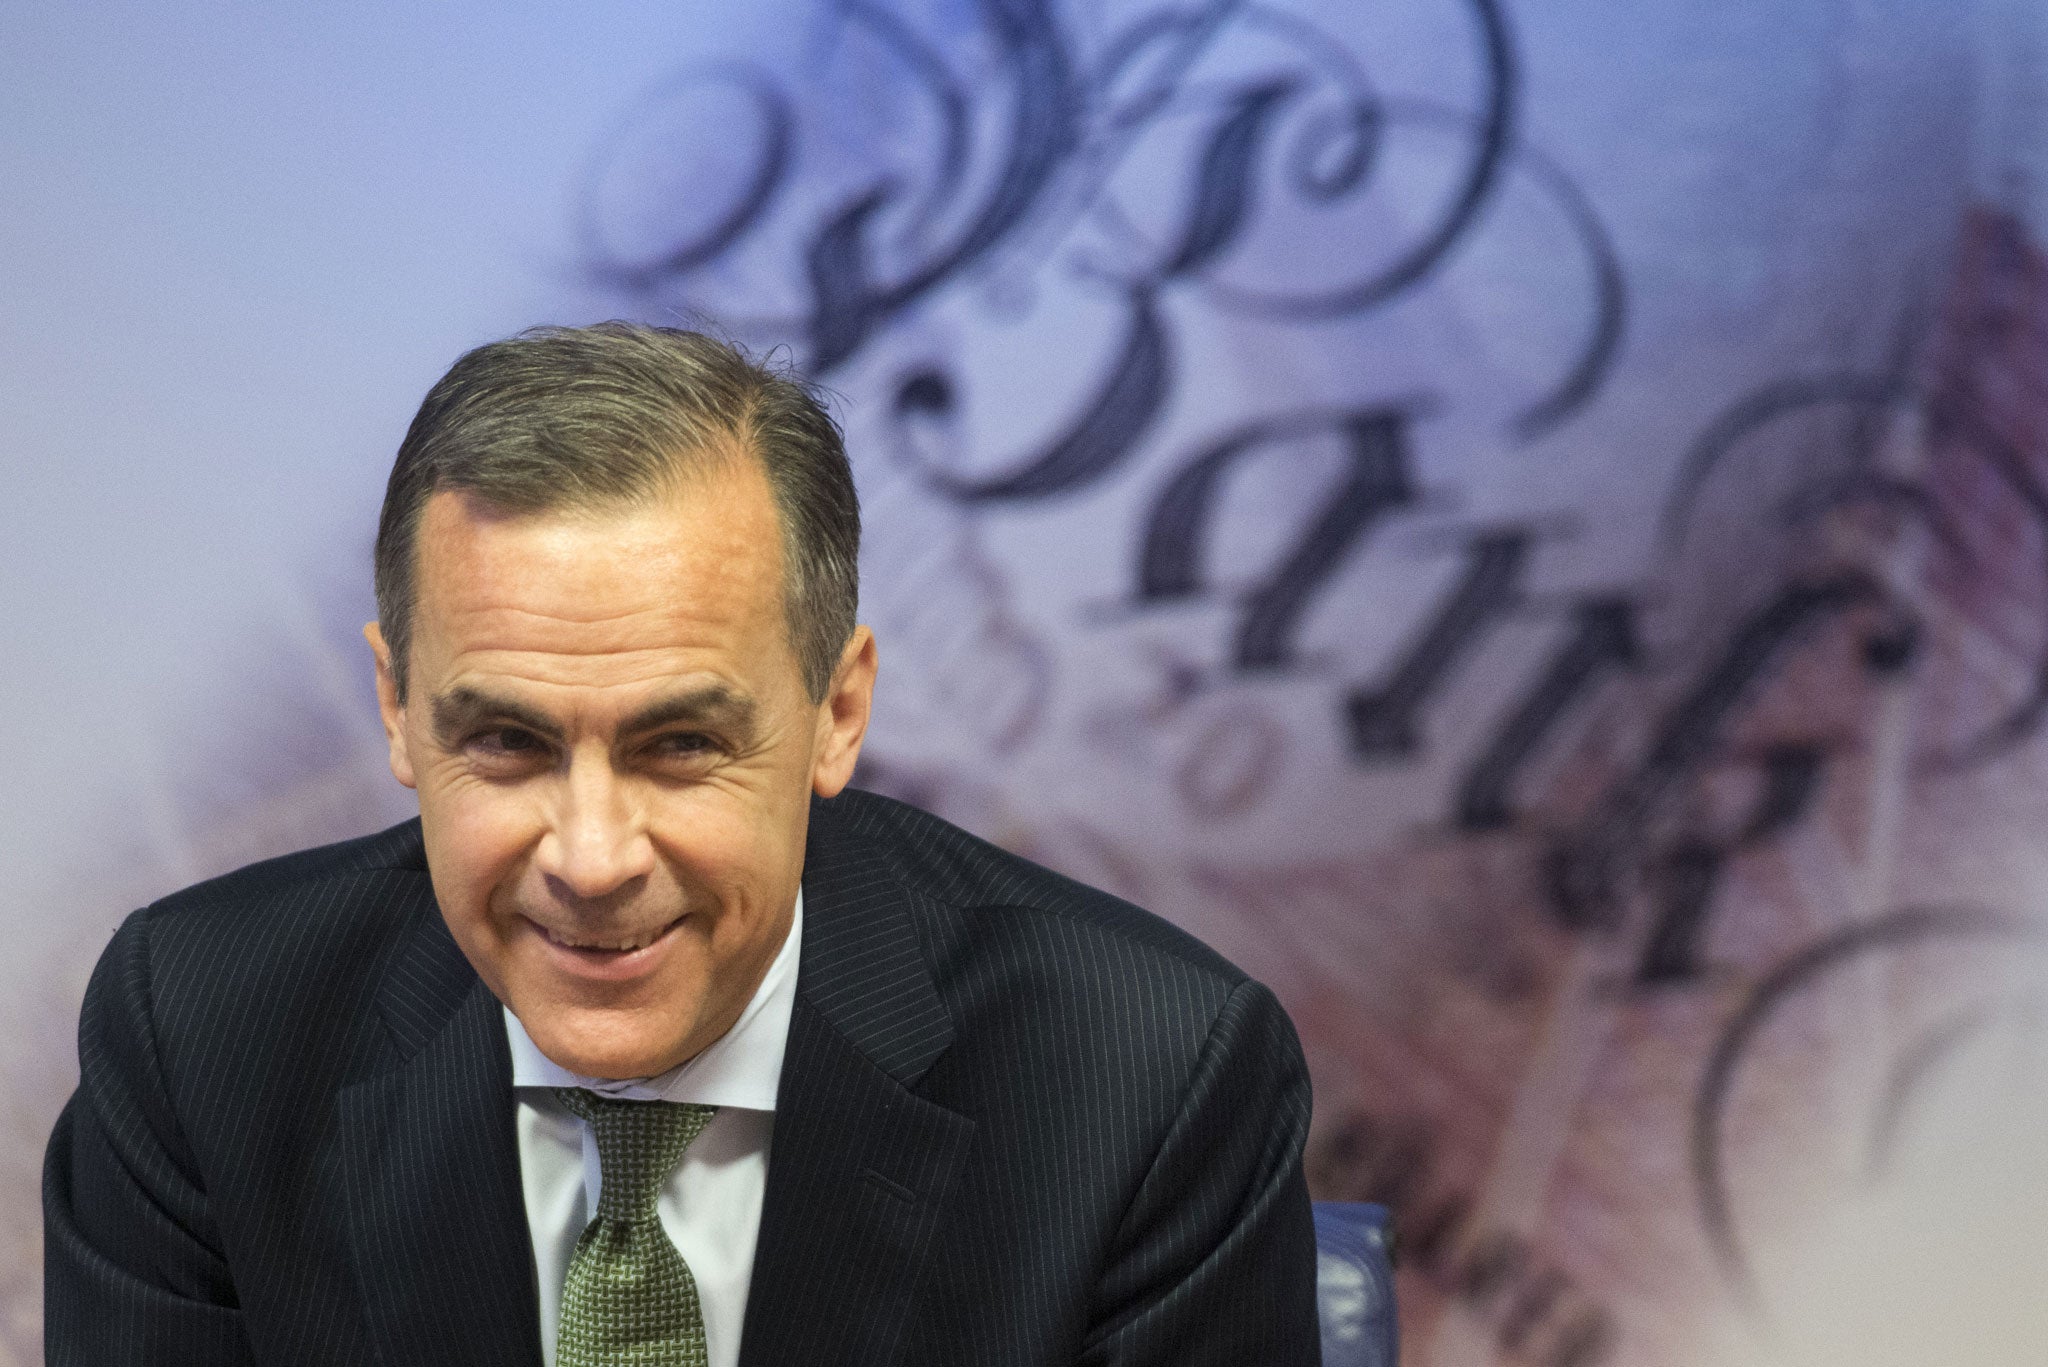 Governor of the Bank of England Mark Carney is expected to raise the base rate shortly after the 2015 general election